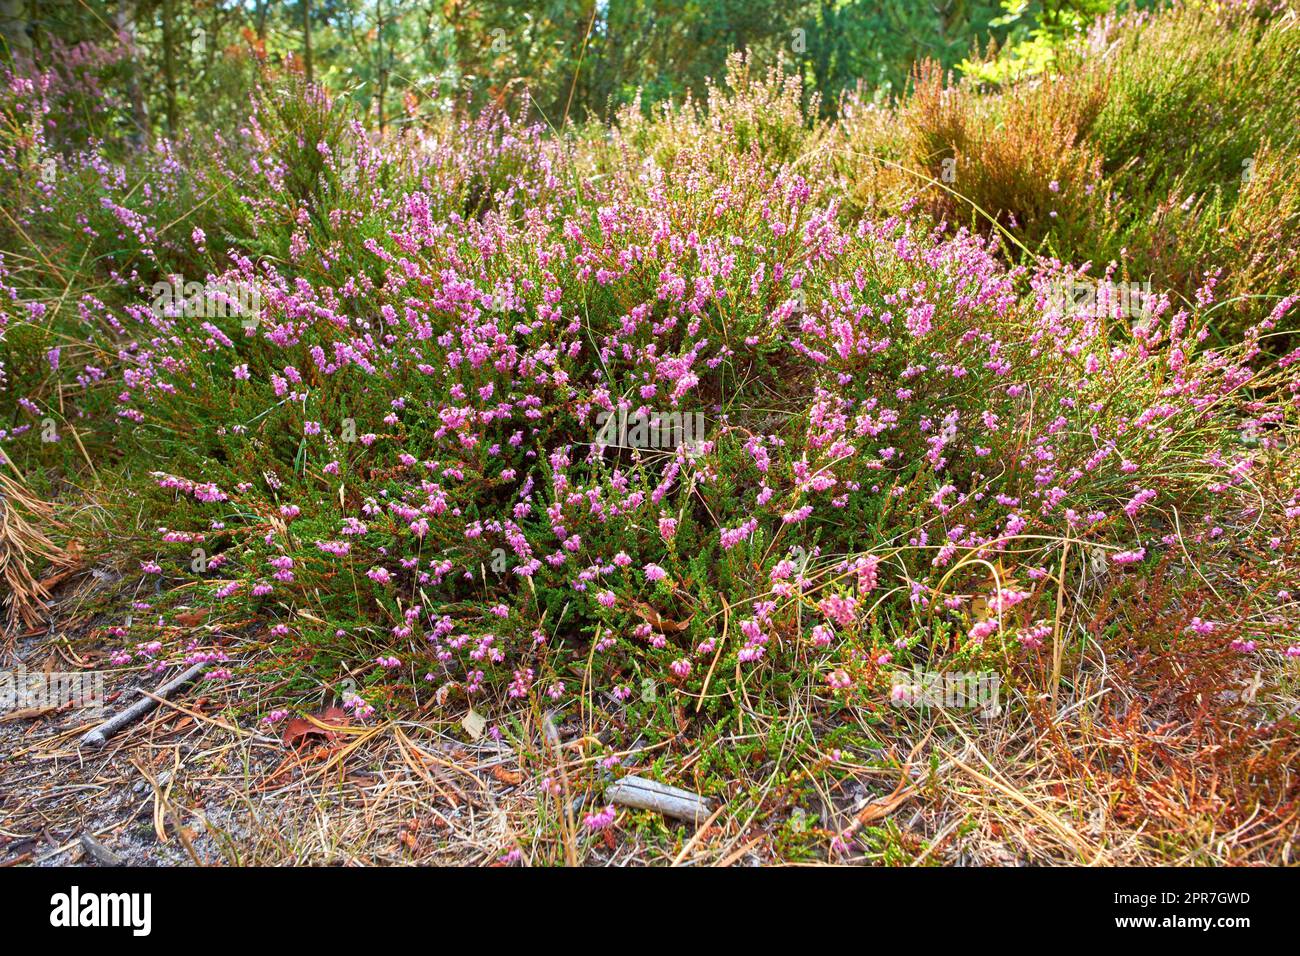 Textured detail of calluna vulgaris blossoming and blooming in wild nature. Scenic view of heather plant flowers growing and flowering on green bush or shrub in a remote field, meadow or countryside. Stock Photo